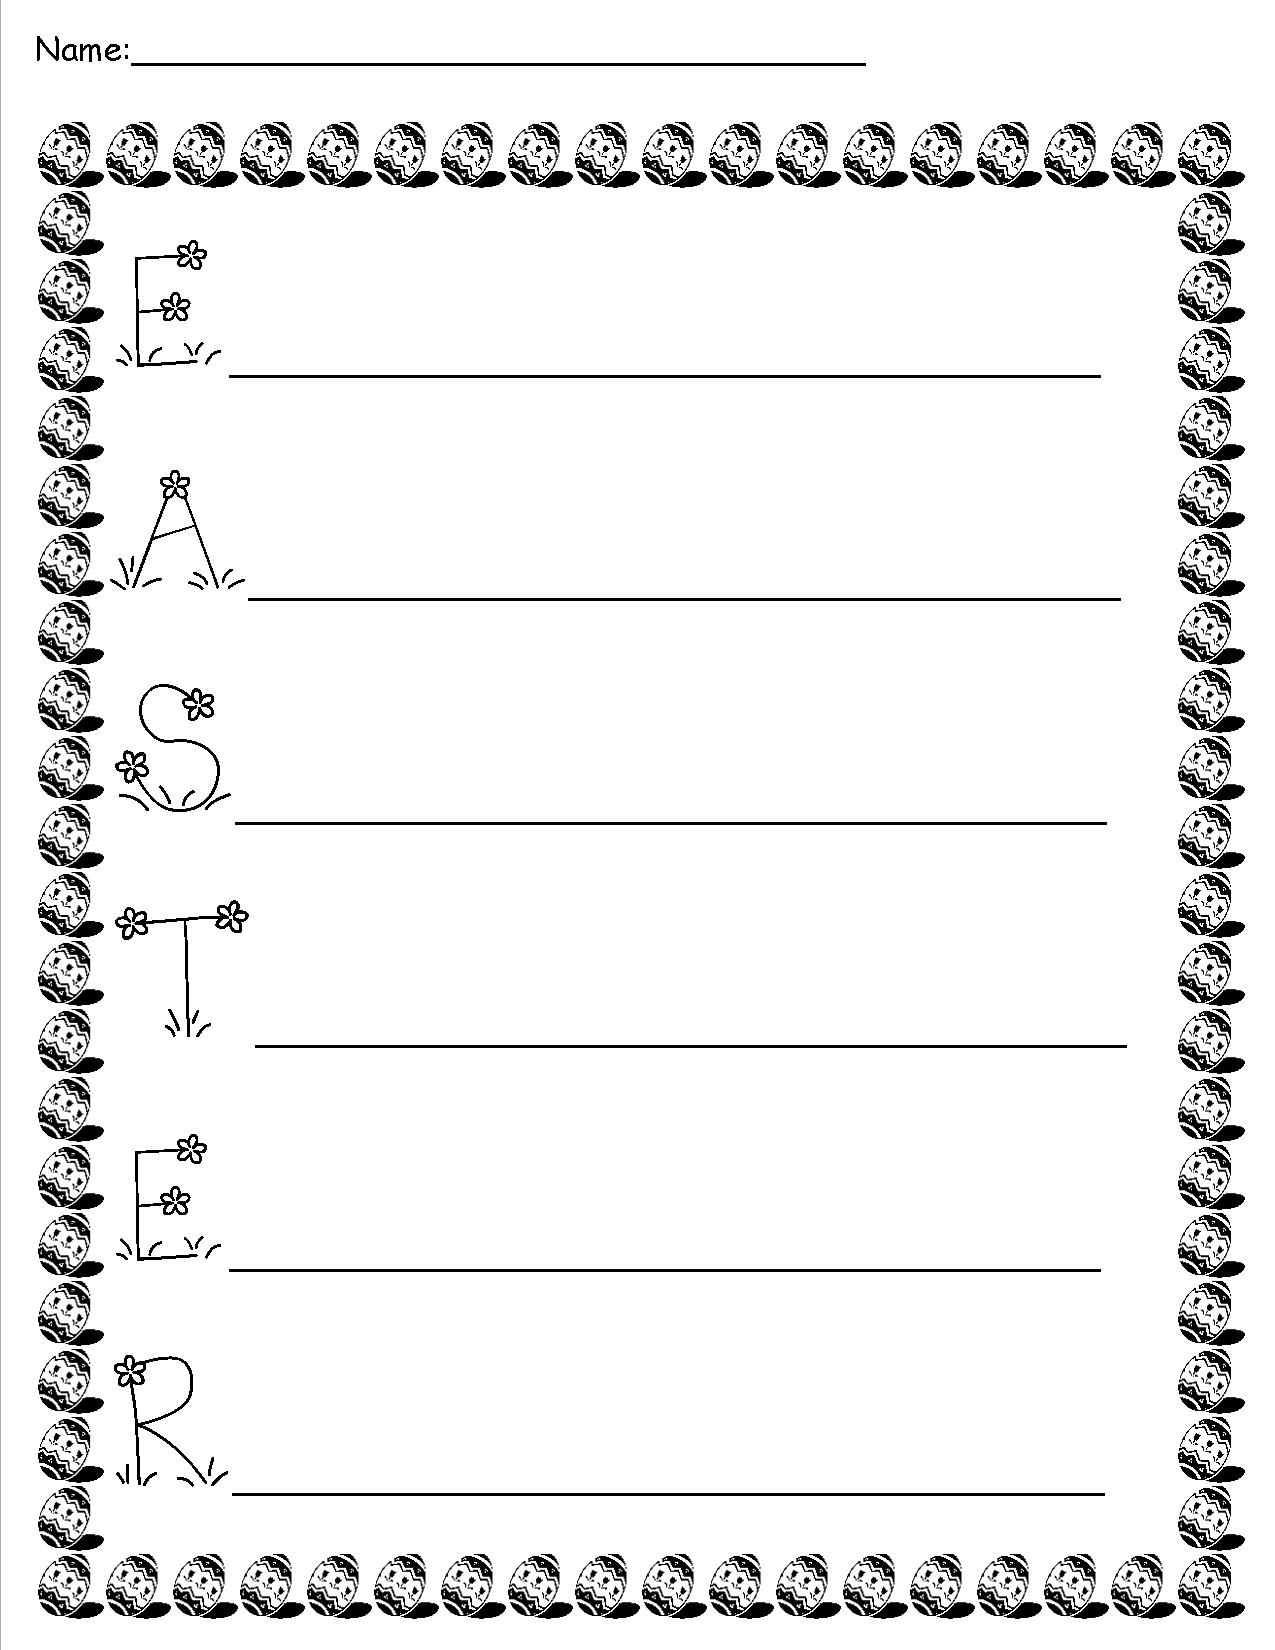 Acrostic Poem Forms Templates And Worksheets